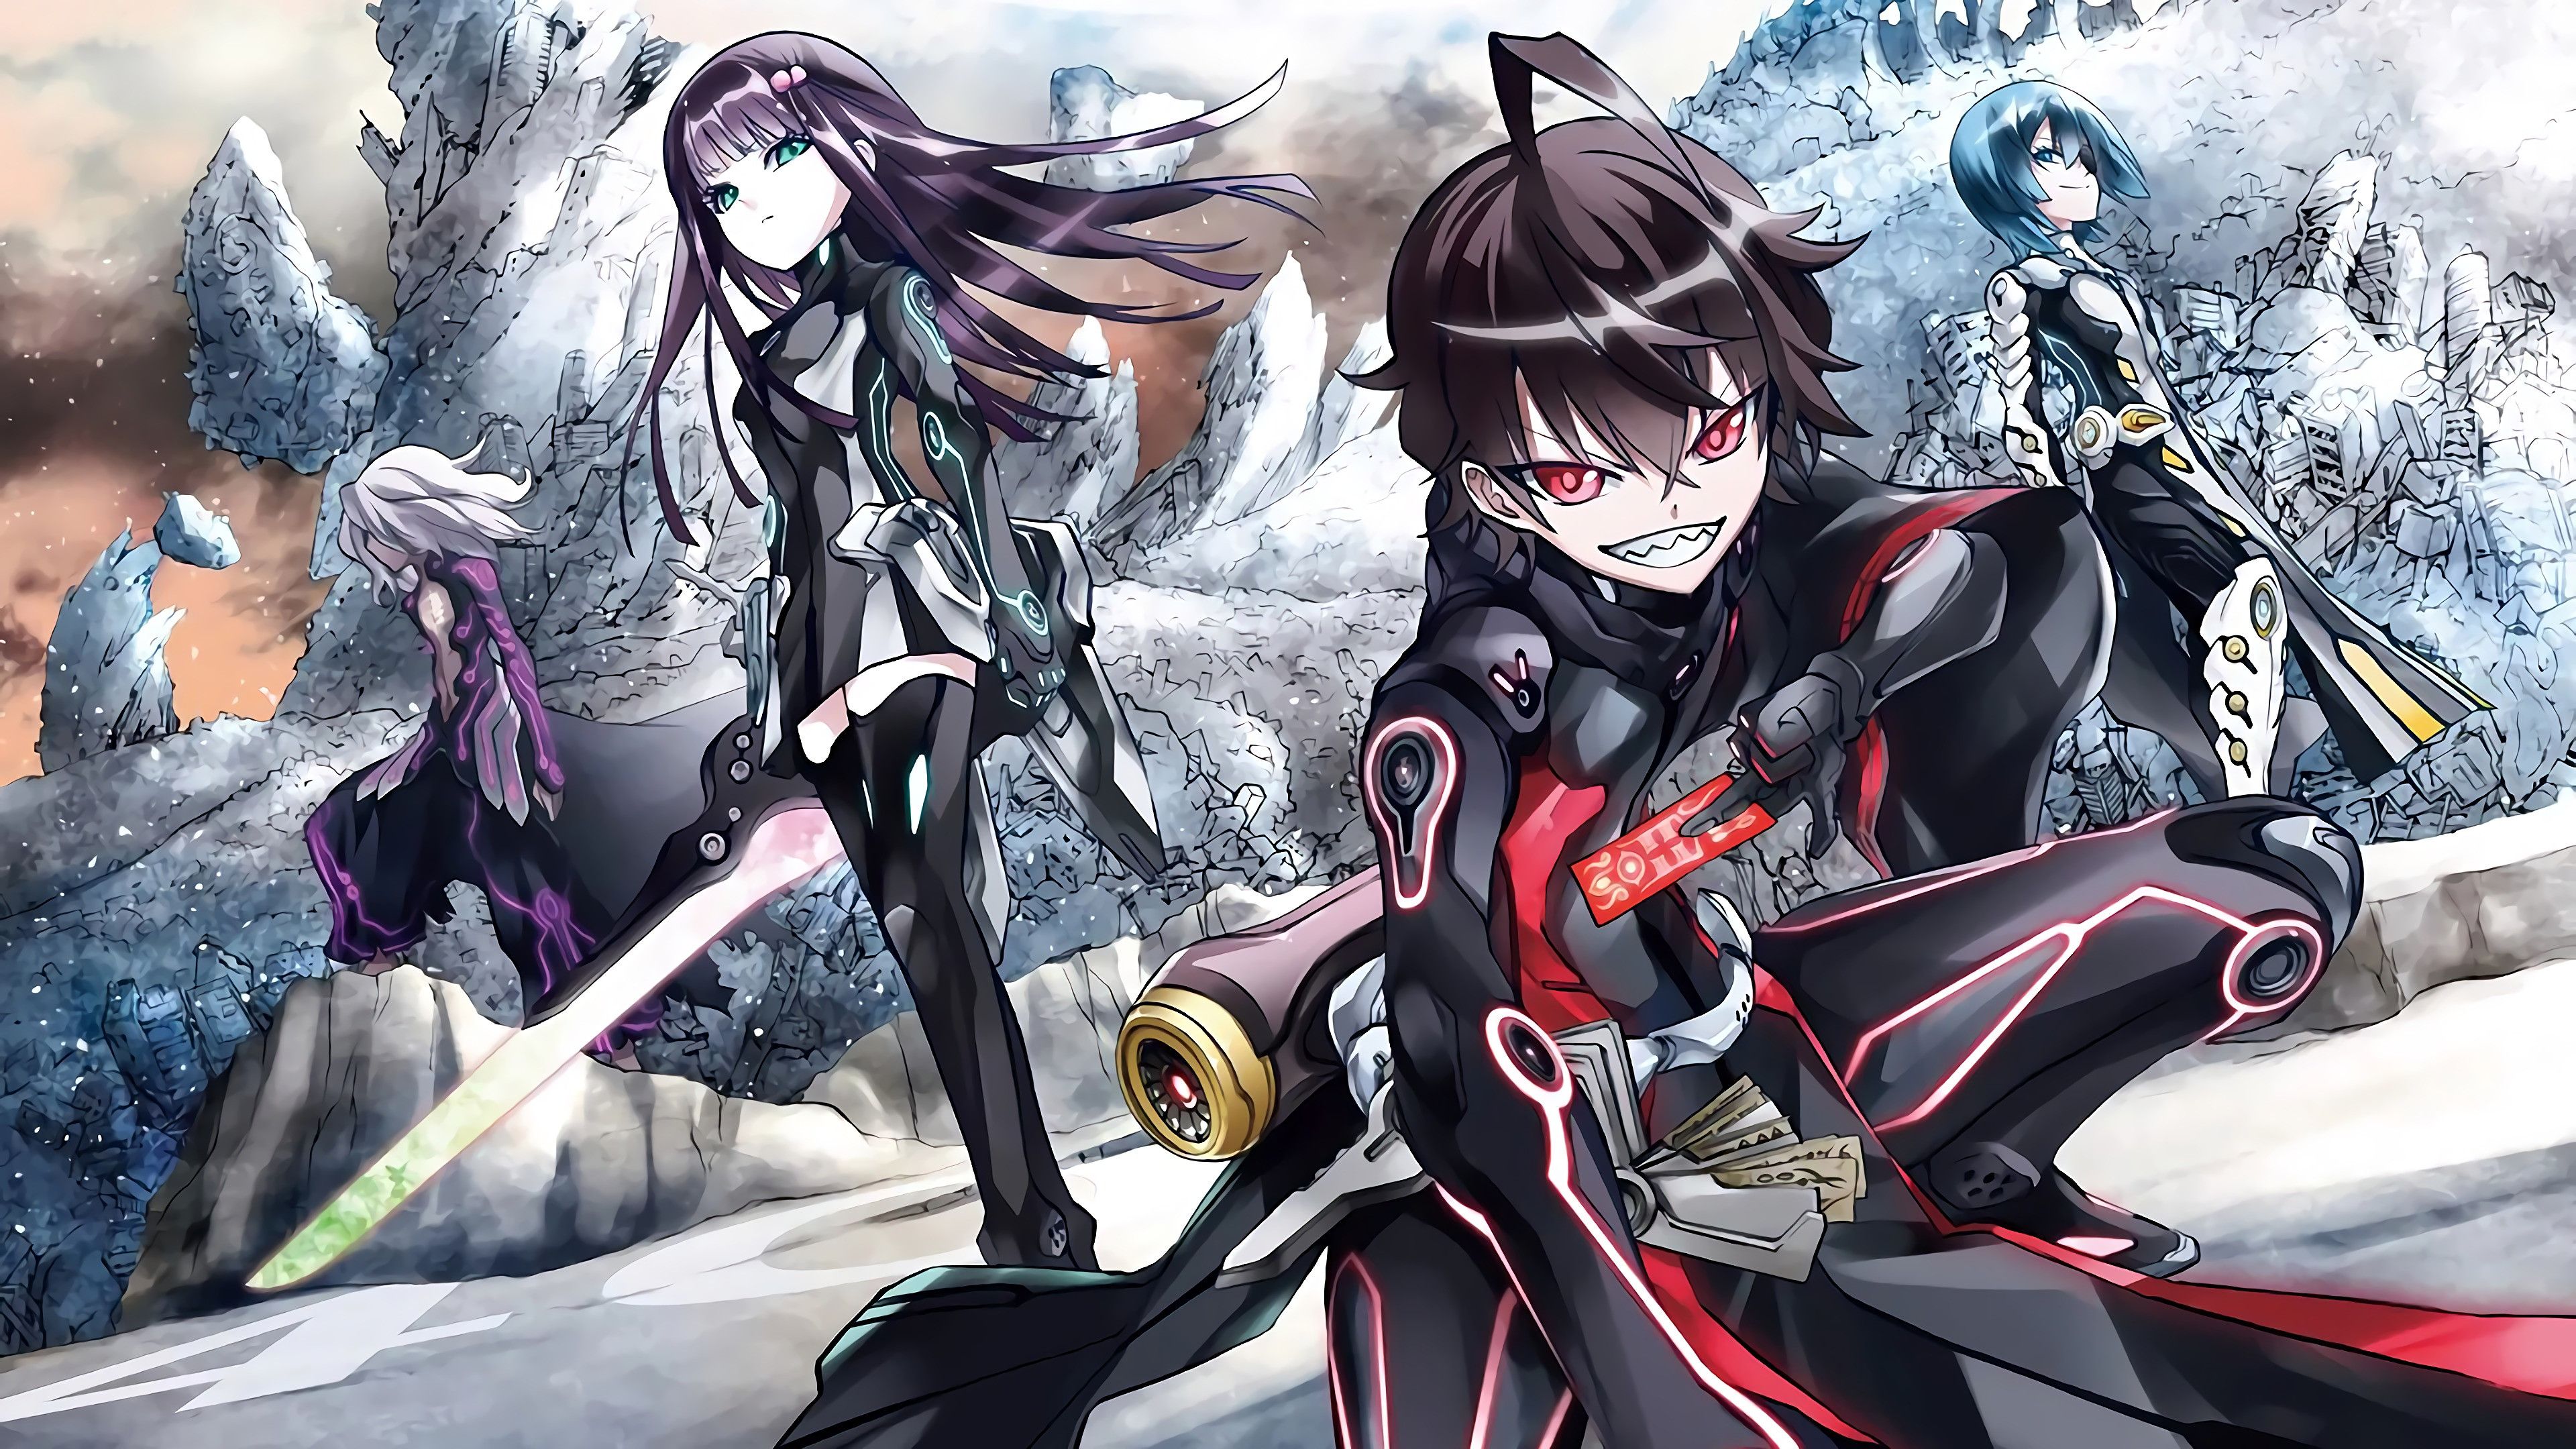  Review for Twin Star Exorcists - Part 1